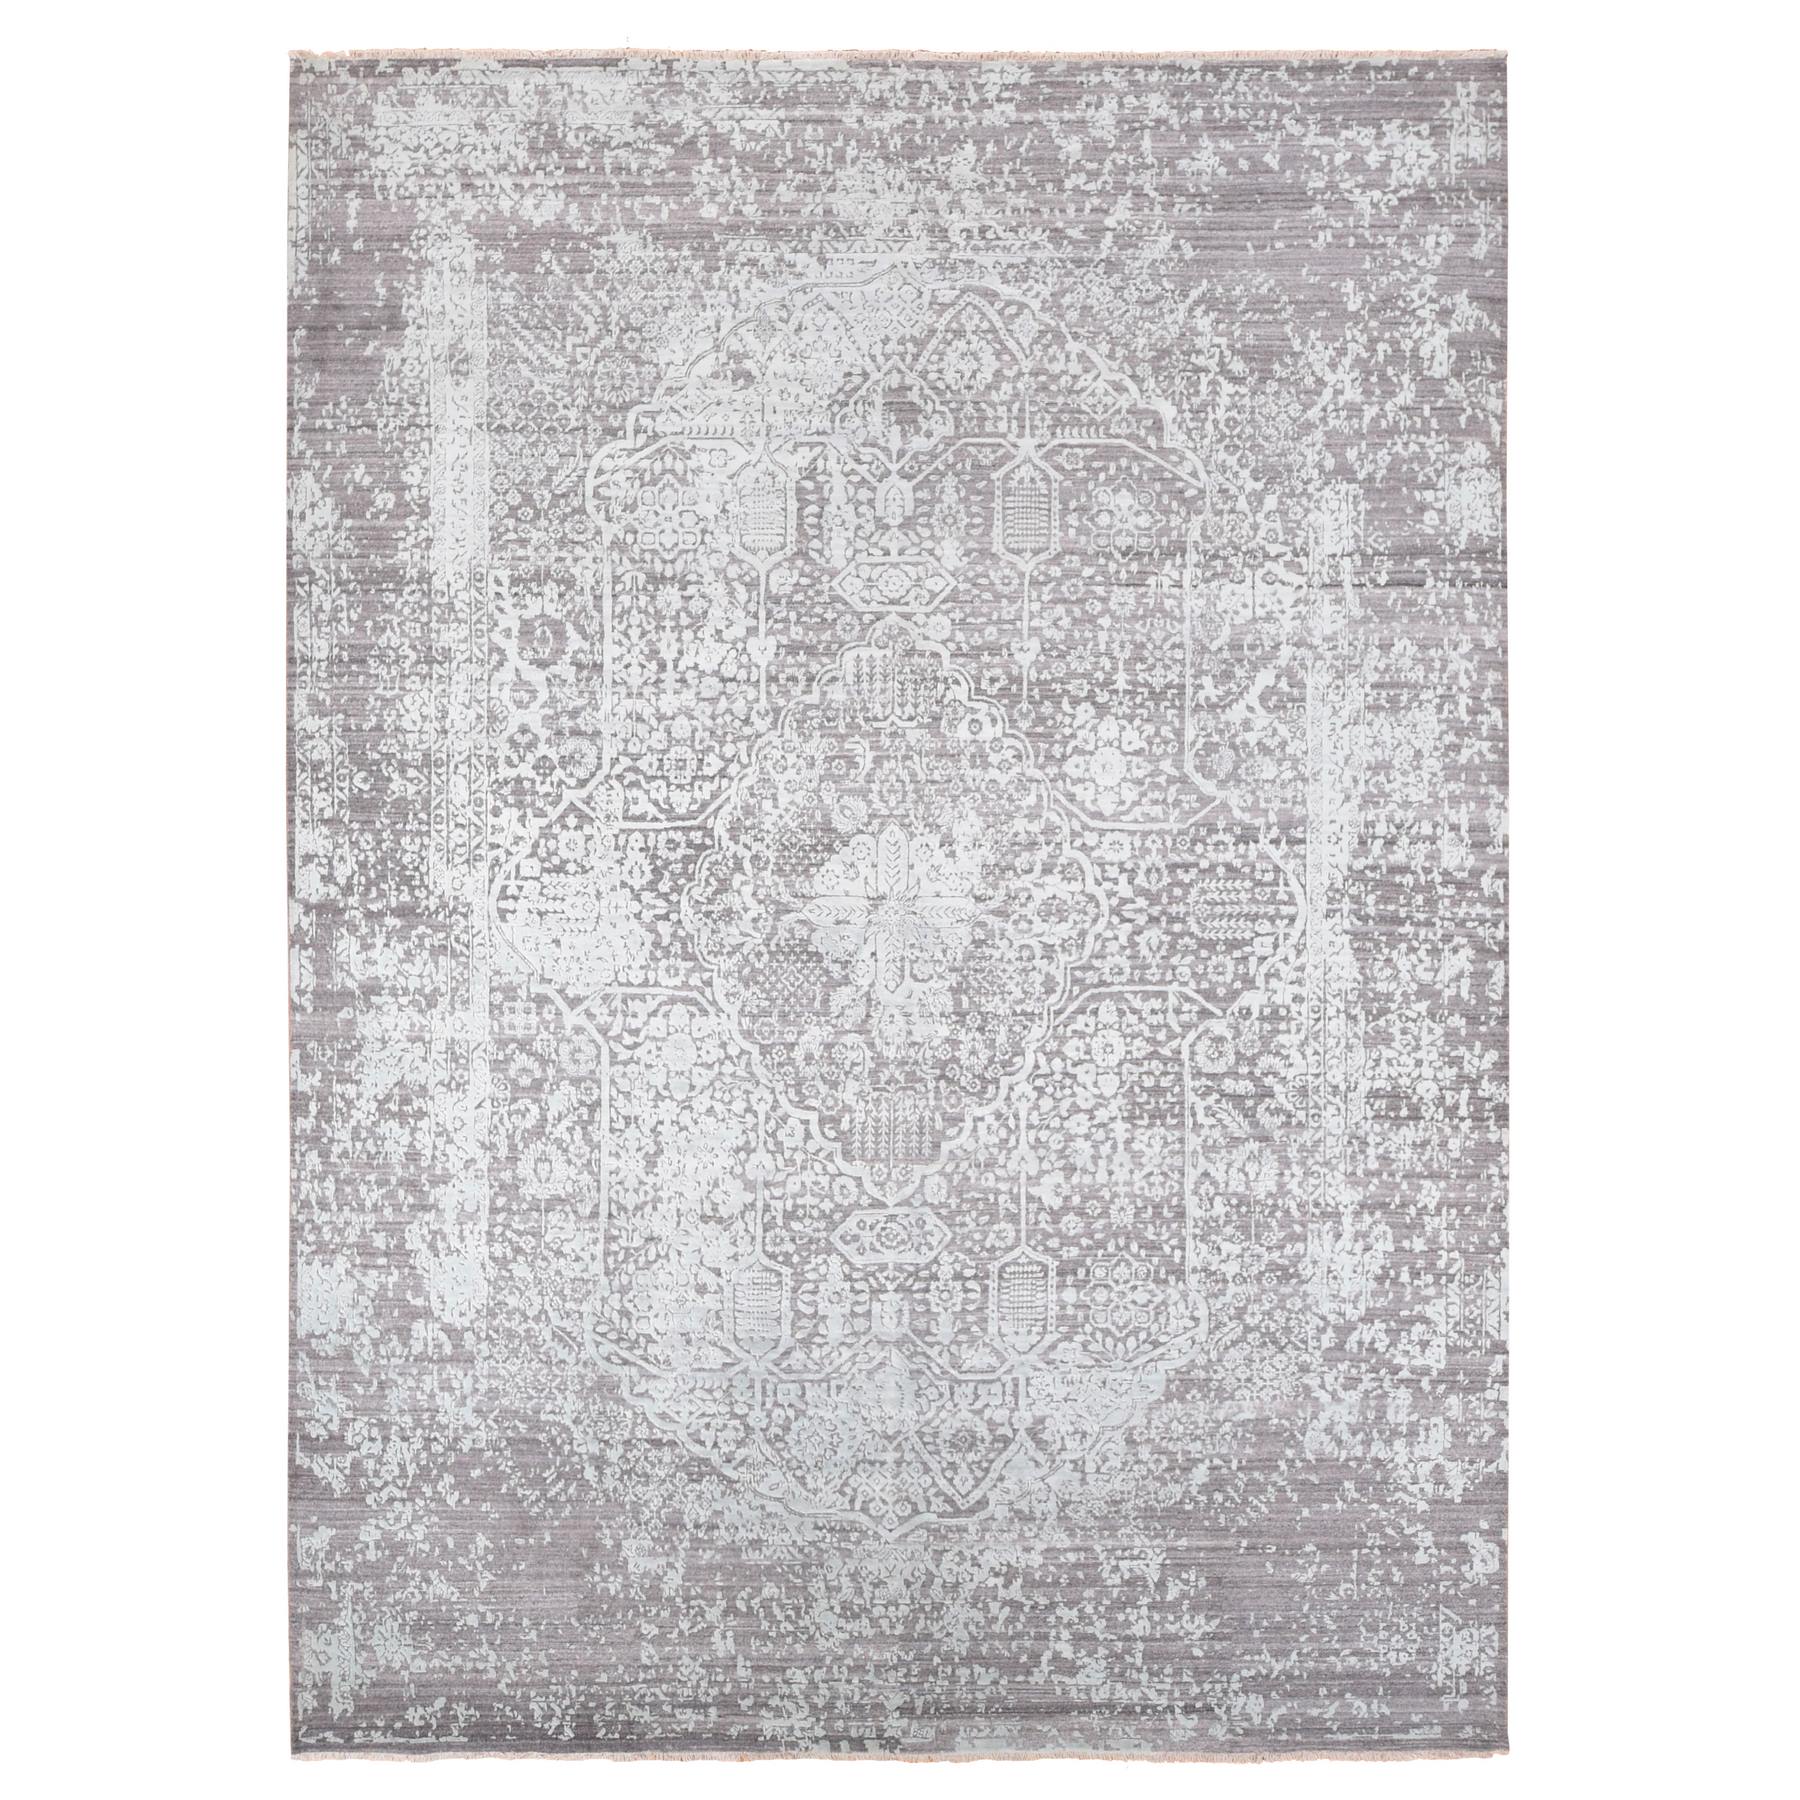  Wool Hand-Knotted Area Rug 9'10